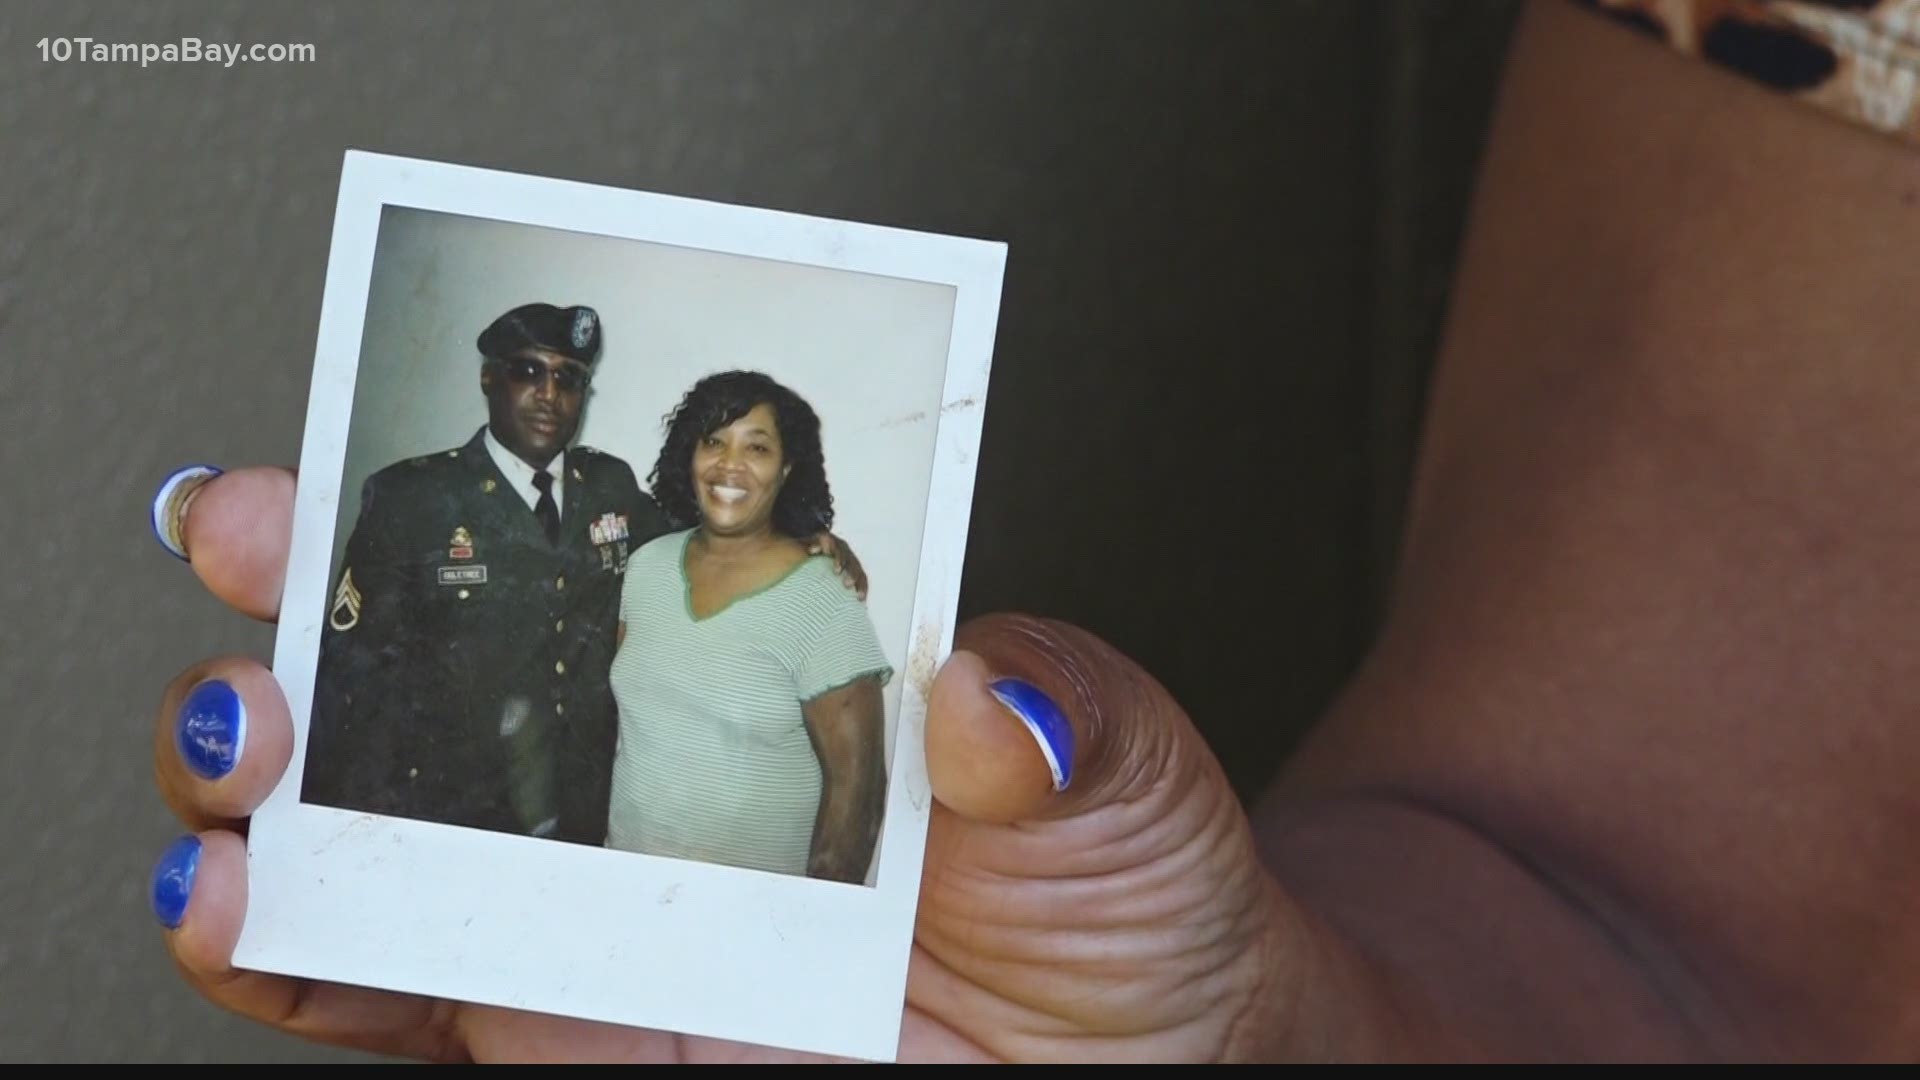 Relatives say Sgt. 1st Class Calvin Ogletree died Thursday at the age of 45.